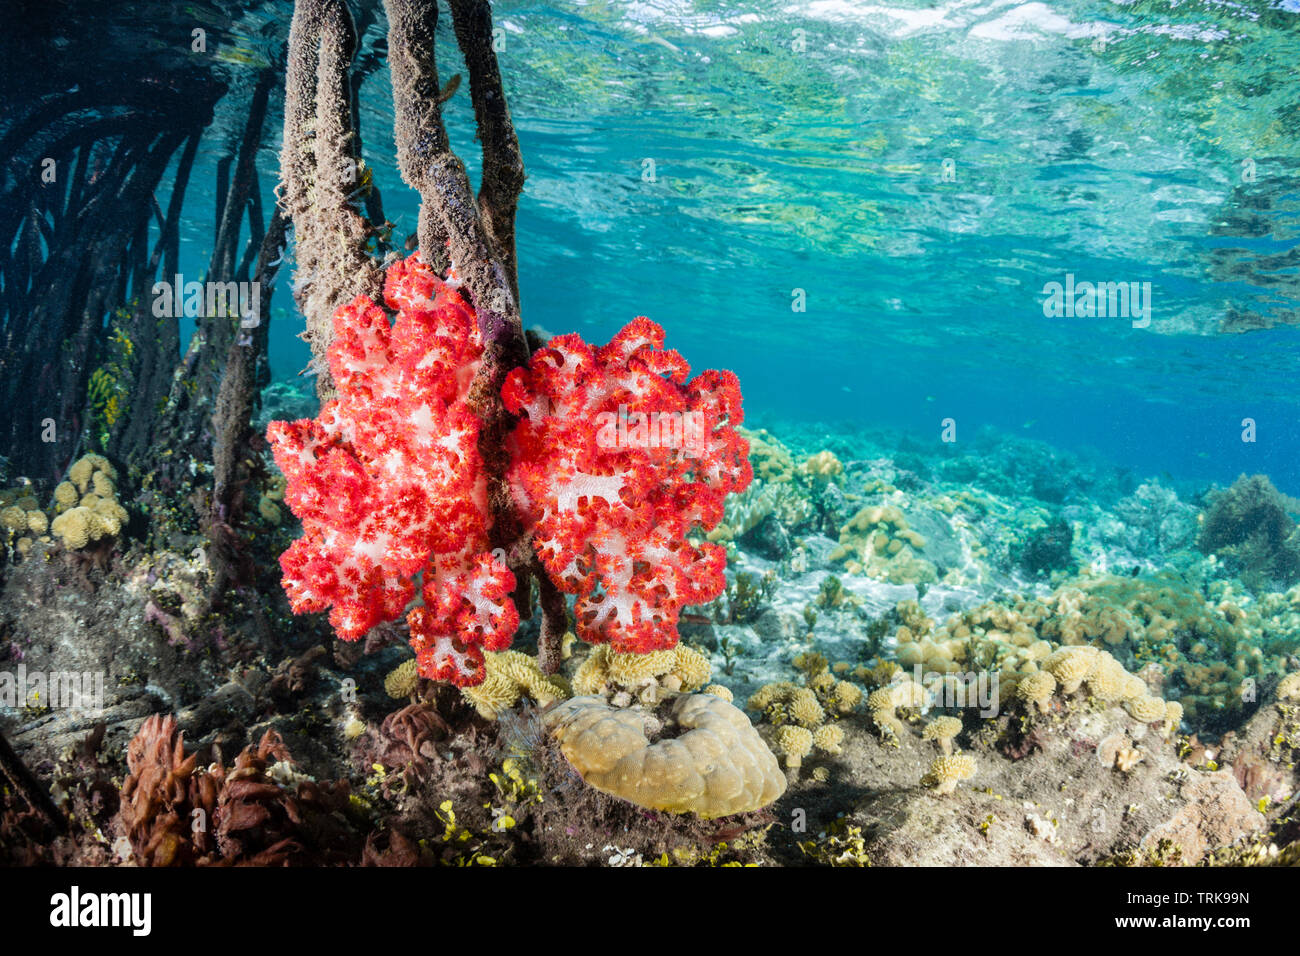 Soft Corals growing in Mangroves, Dendronephthya, Lissenung, New Ireland, Papua New Guinea Stock Photo